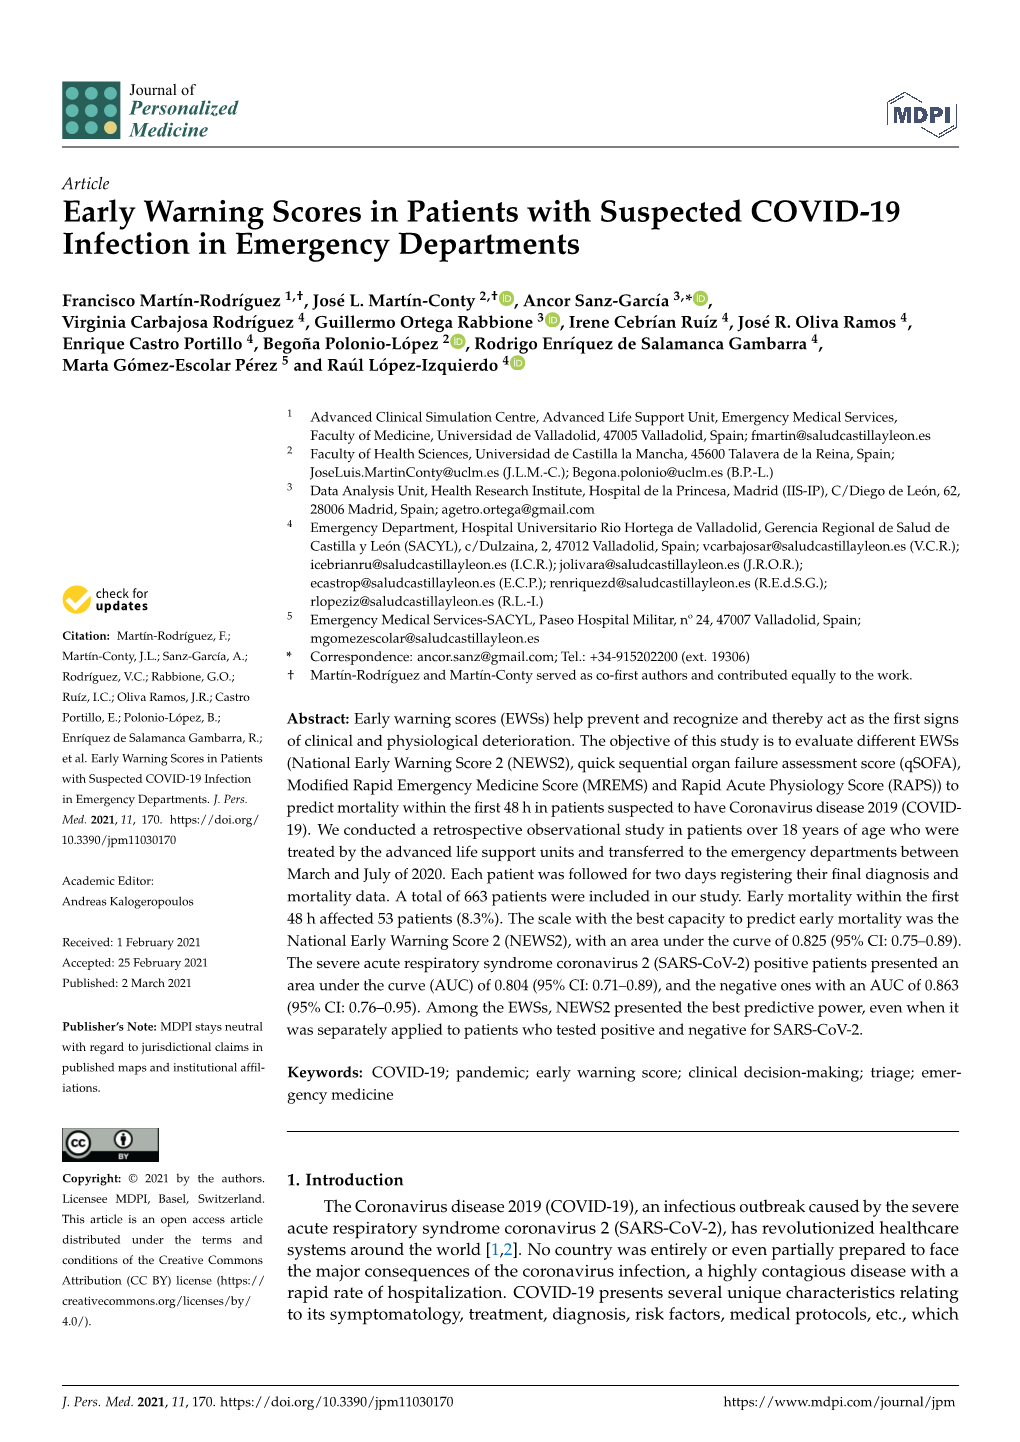 Early Warning Scores in Patients with Suspected COVID-19 Infection in Emergency Departments